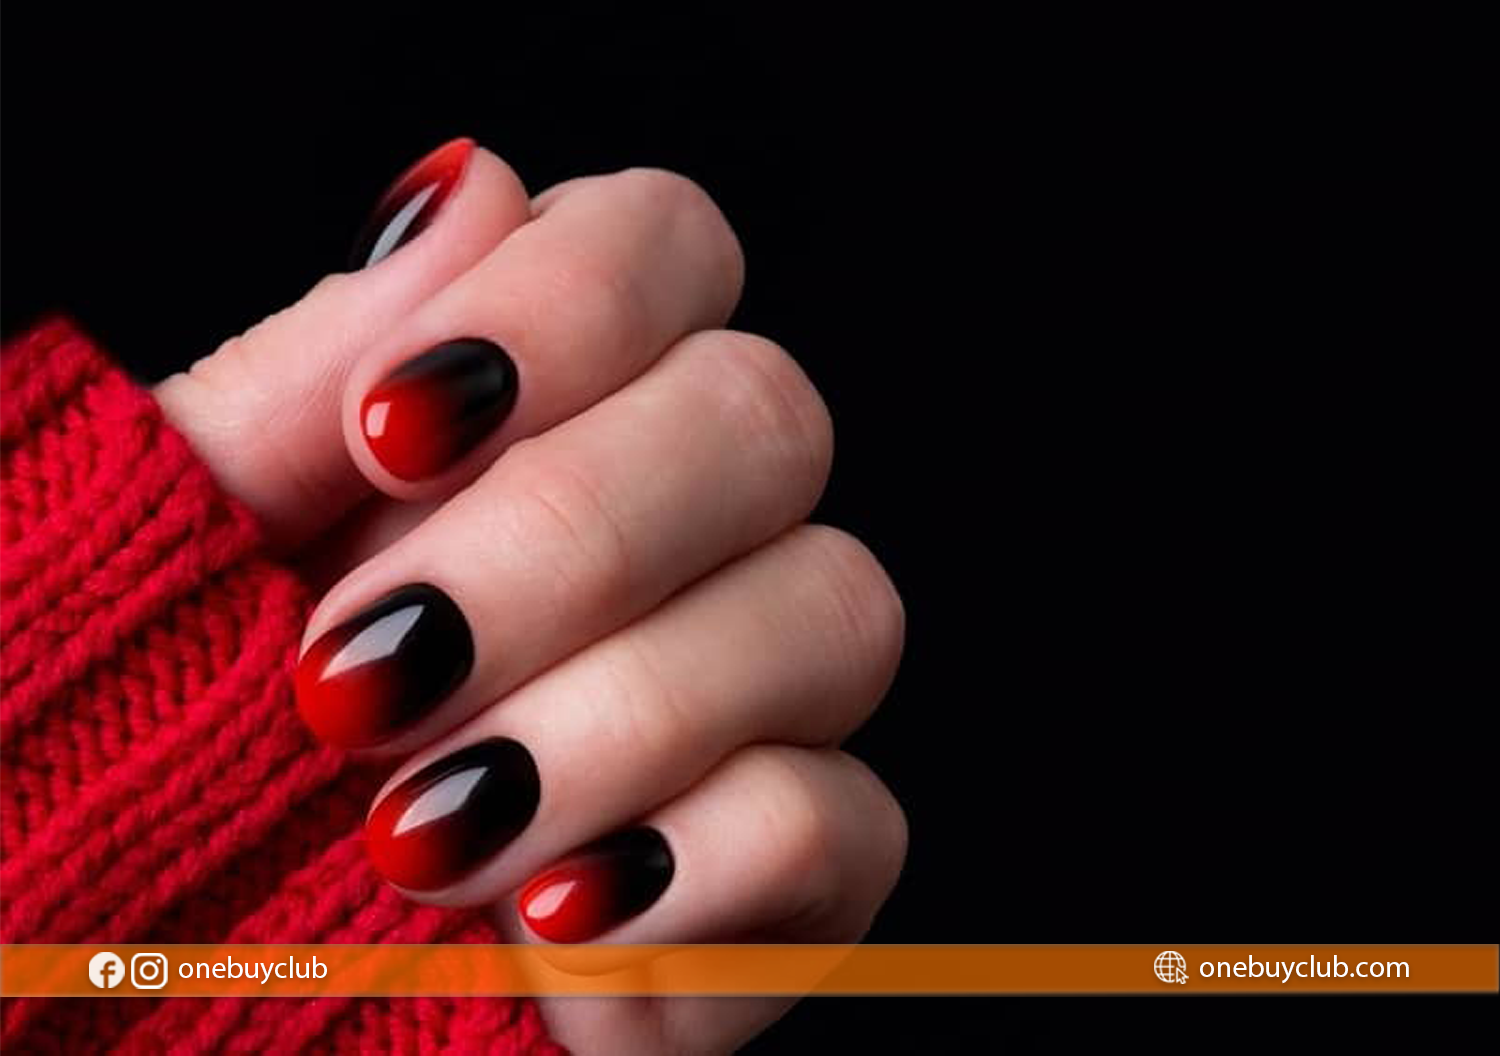 One Buy Cub: How to Do Black and Red Ombre Nails? Are Ombre Nails in Fashion?